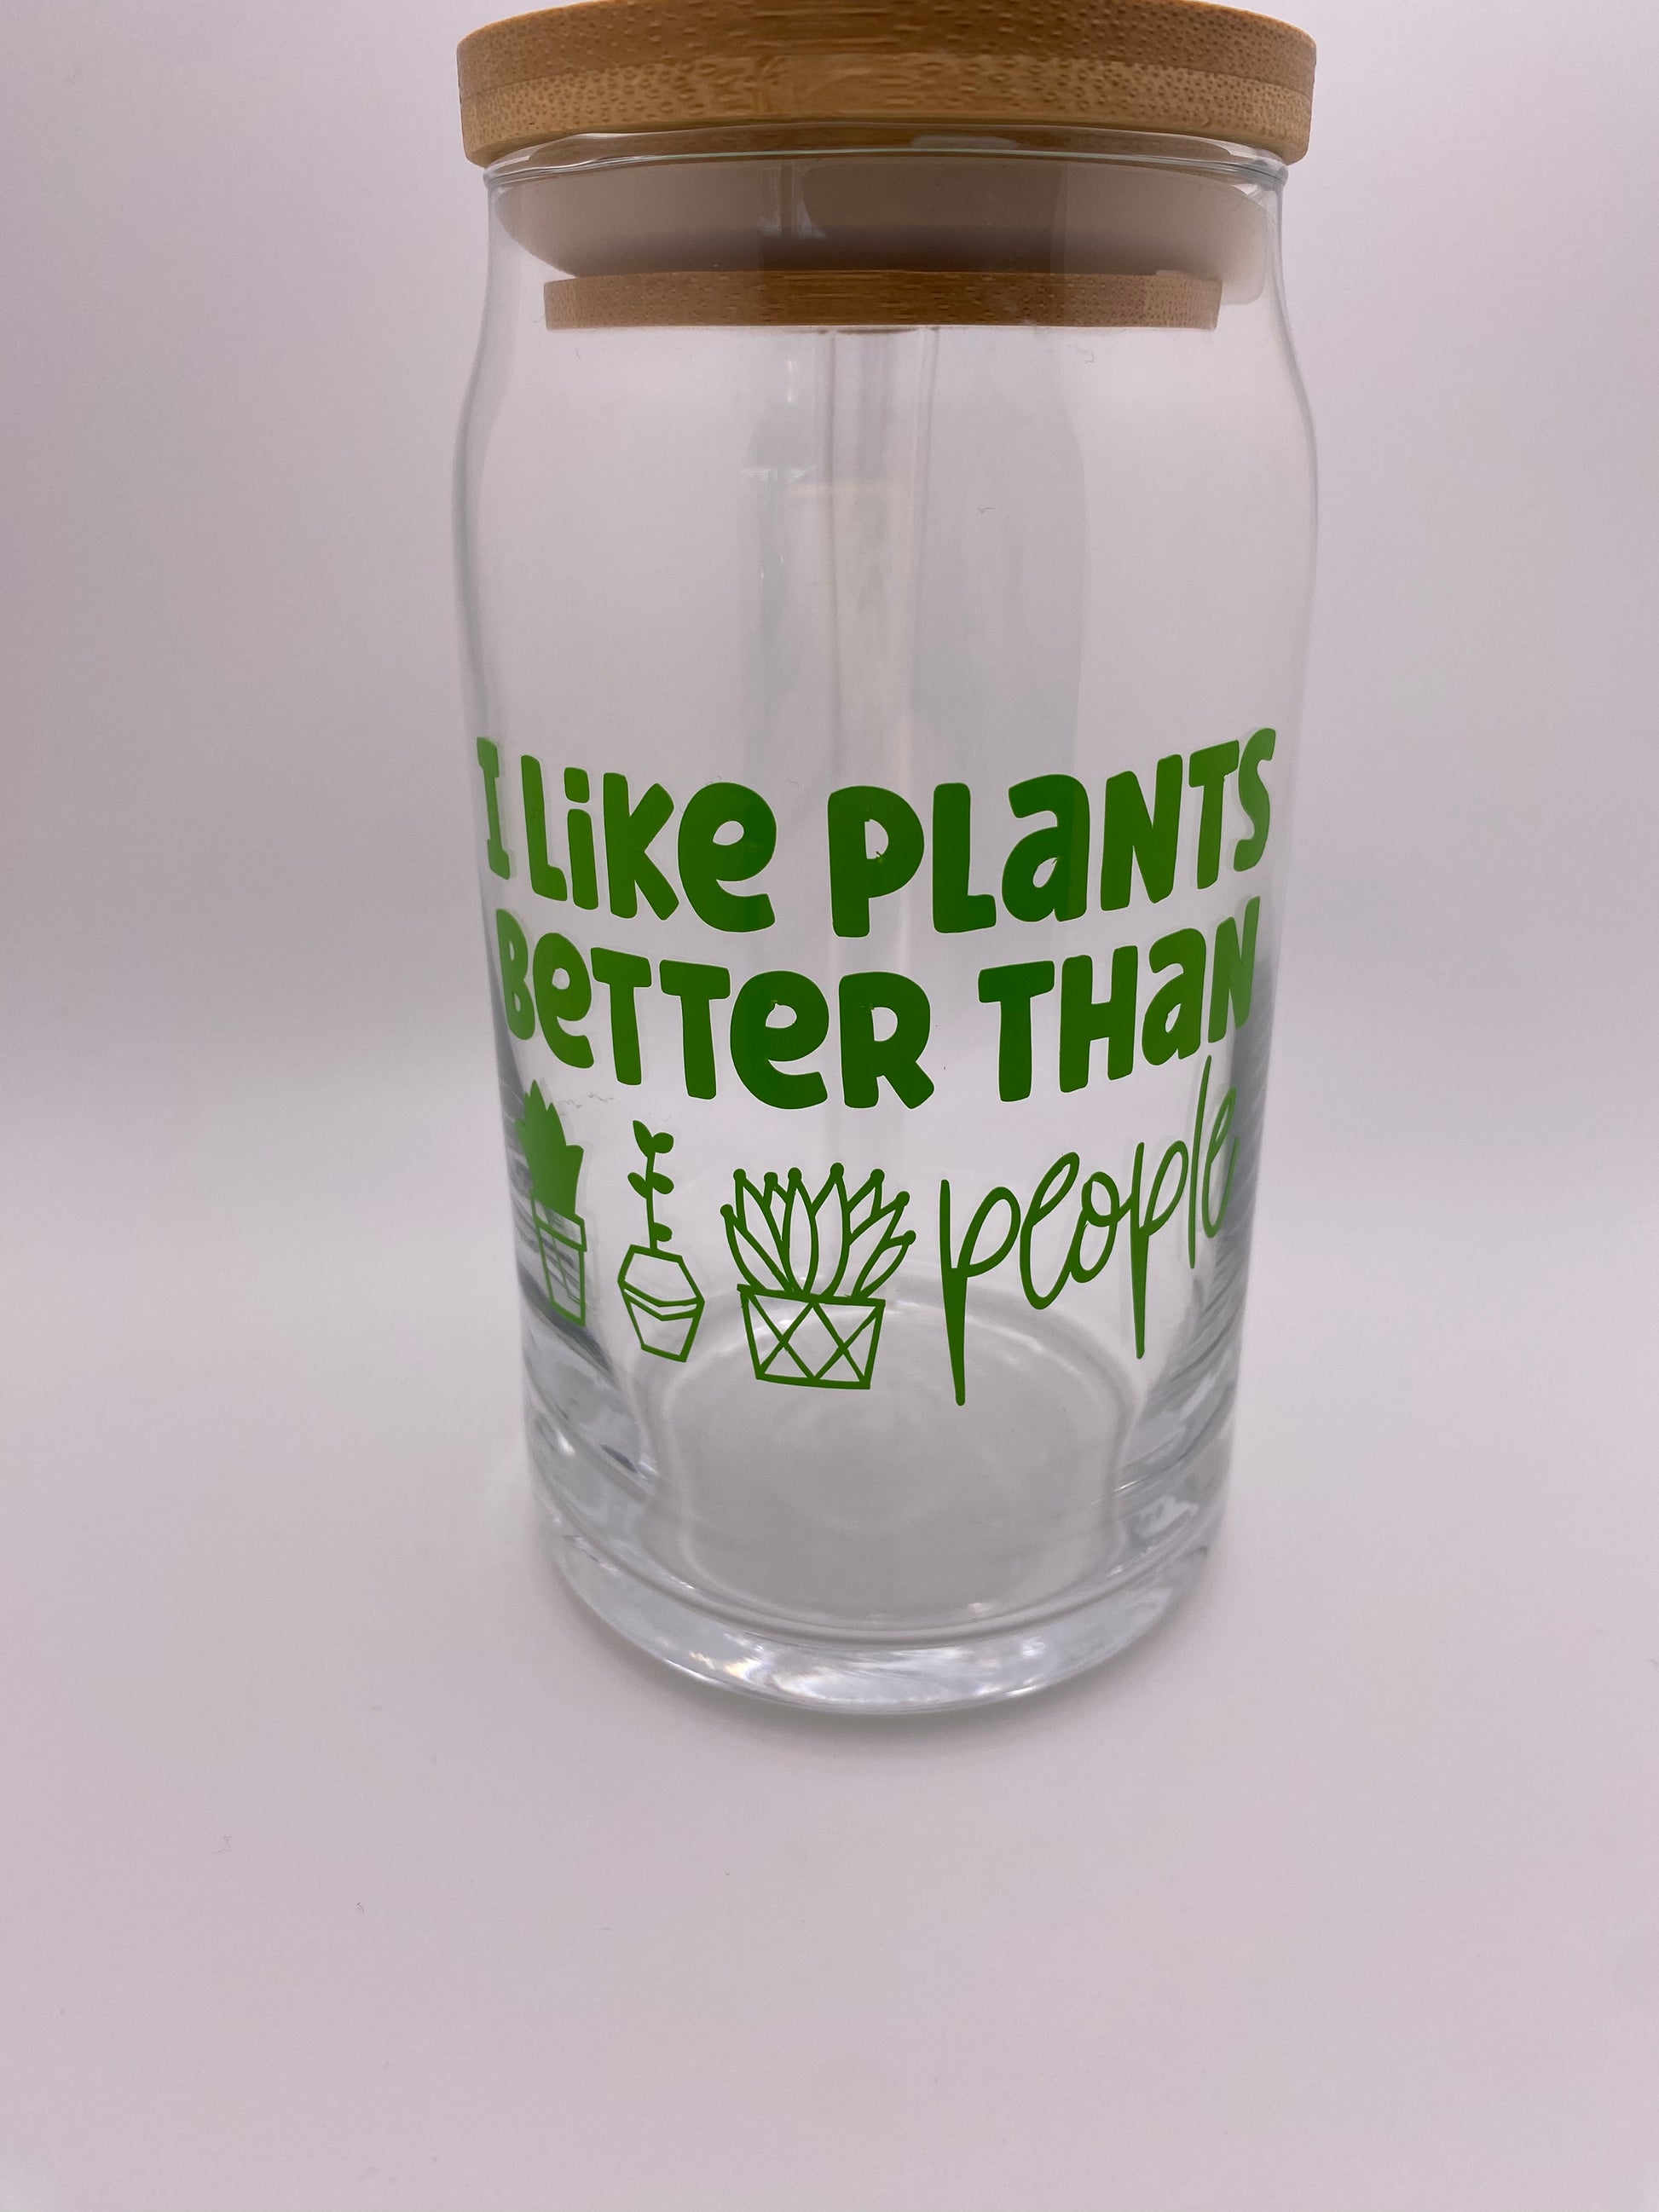 I like plants better than people, 16 oz Libby Cup/libby glass